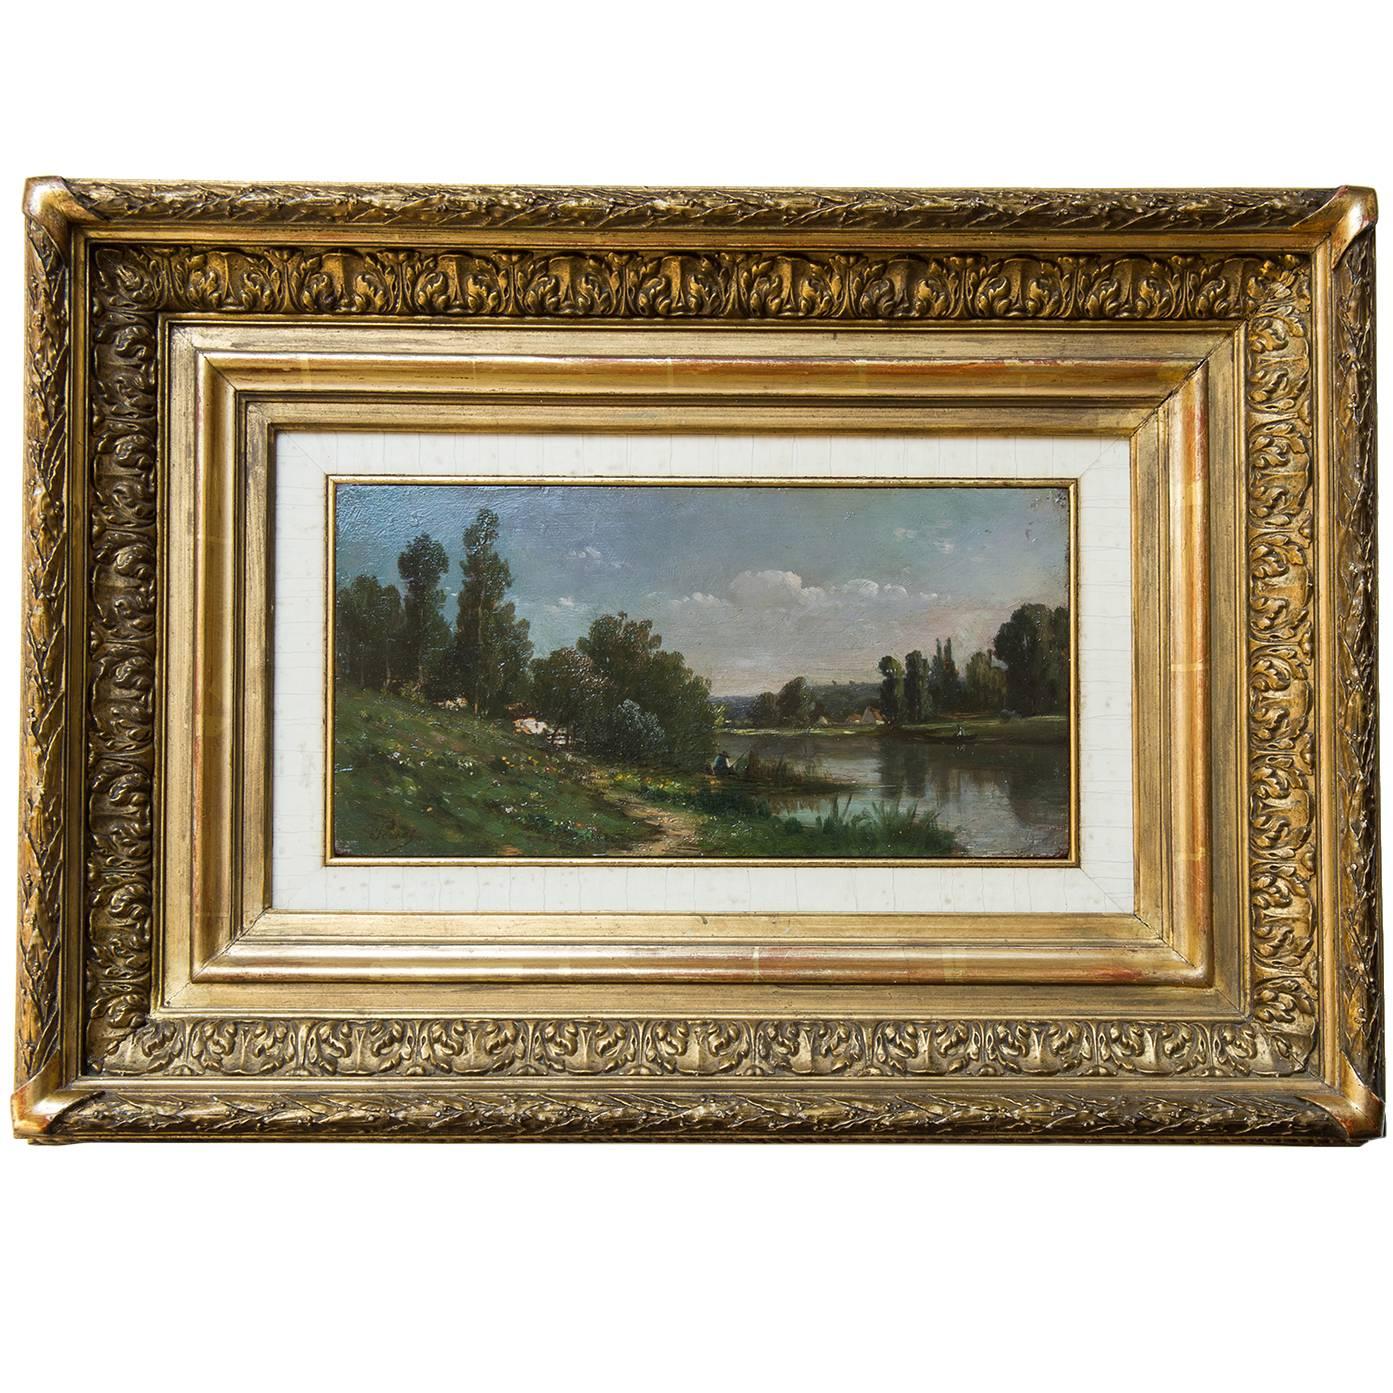 Countryside Landscape Old French Painting Like a Miniature